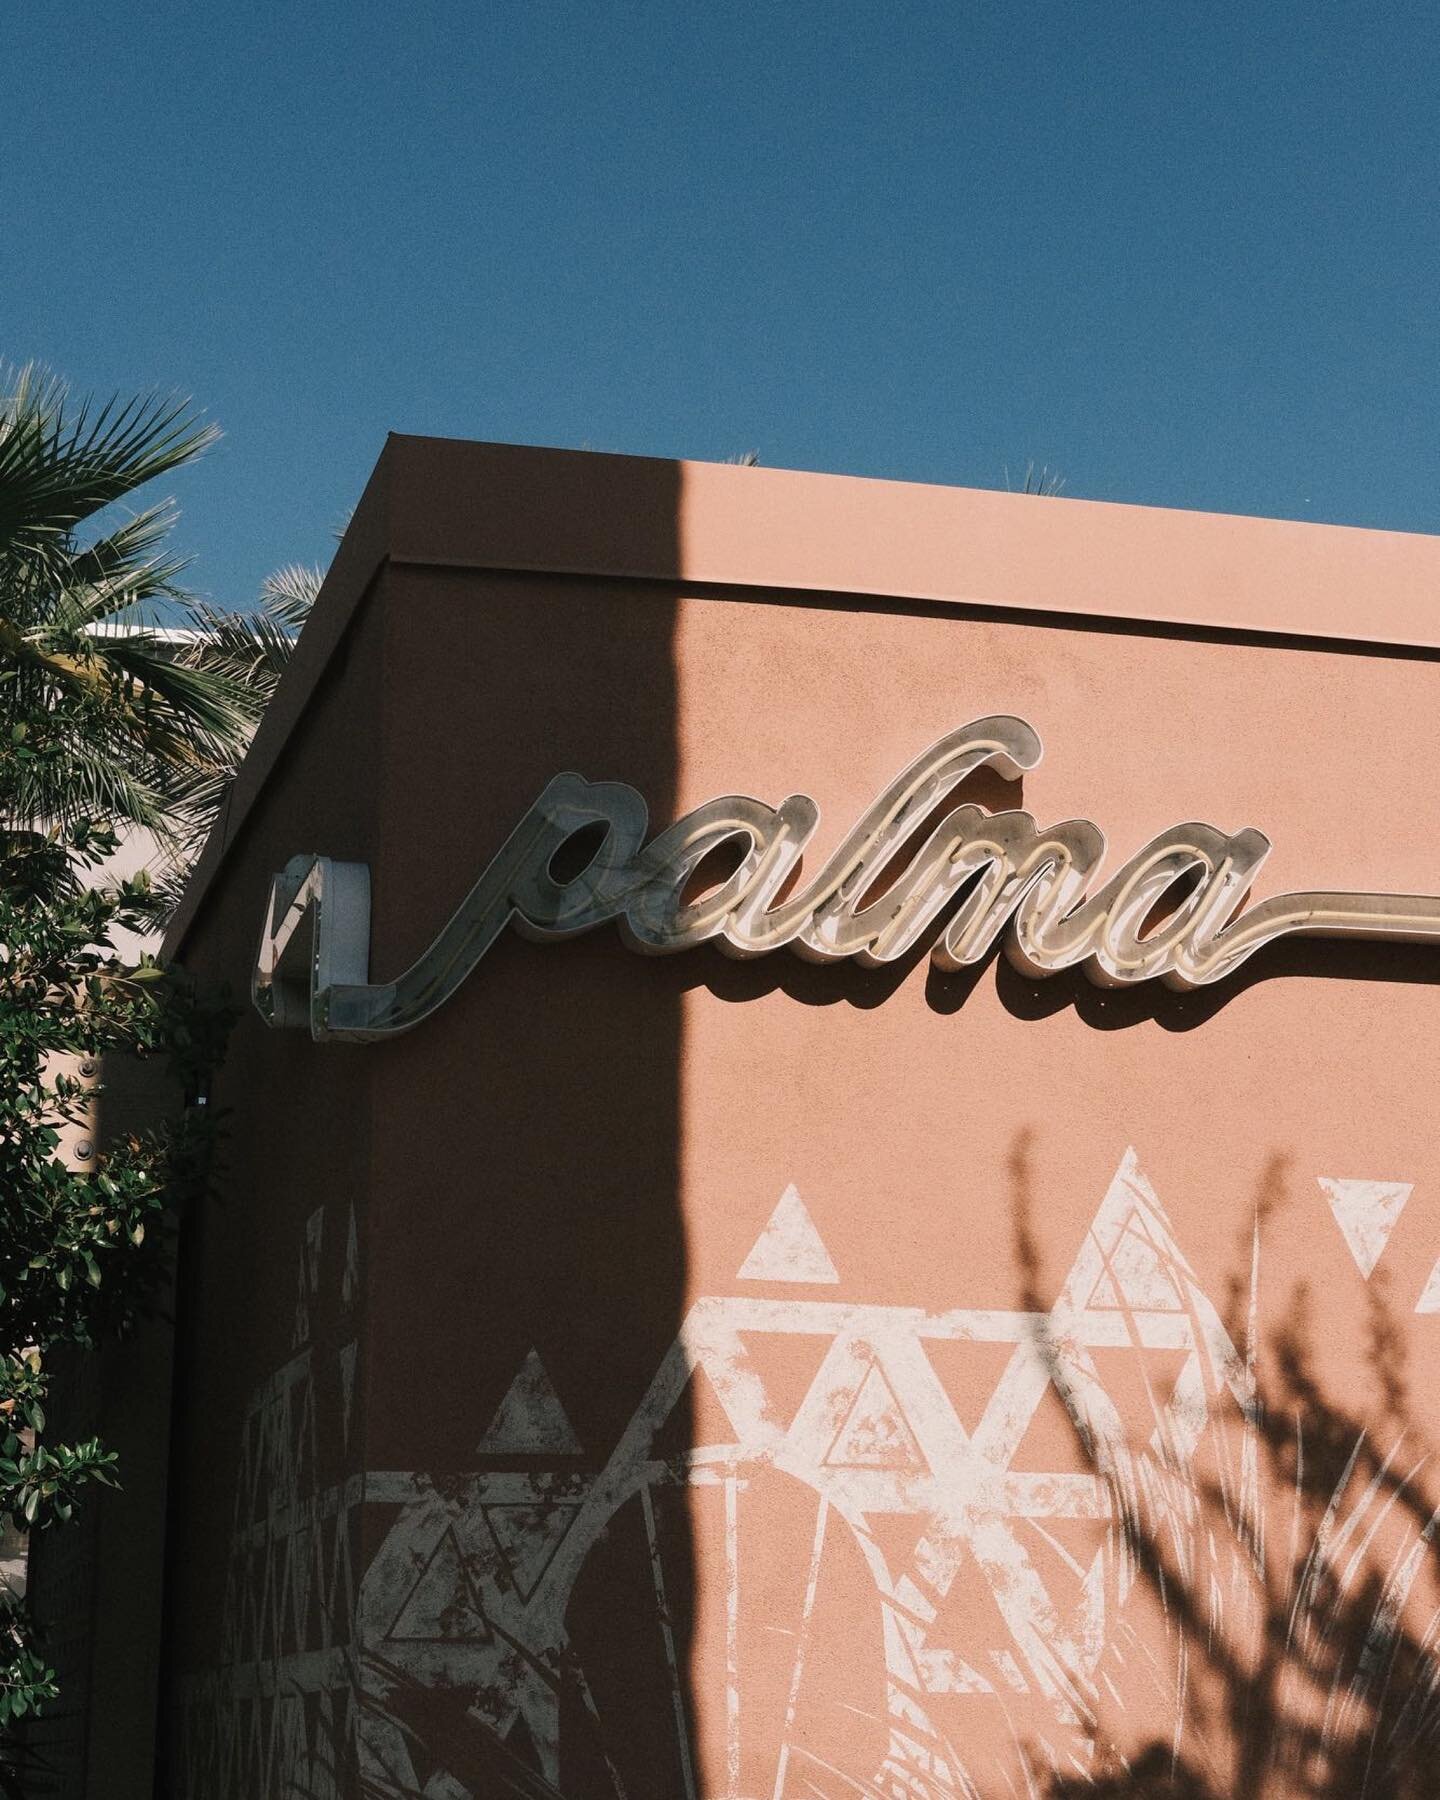 Welcome to @palmaphx 🌴
// [𝐃𝐞𝐭𝐚𝐢𝐥𝐬 + 𝐀𝐞𝐬𝐭𝐡𝐞𝐭𝐢𝐜𝐬]